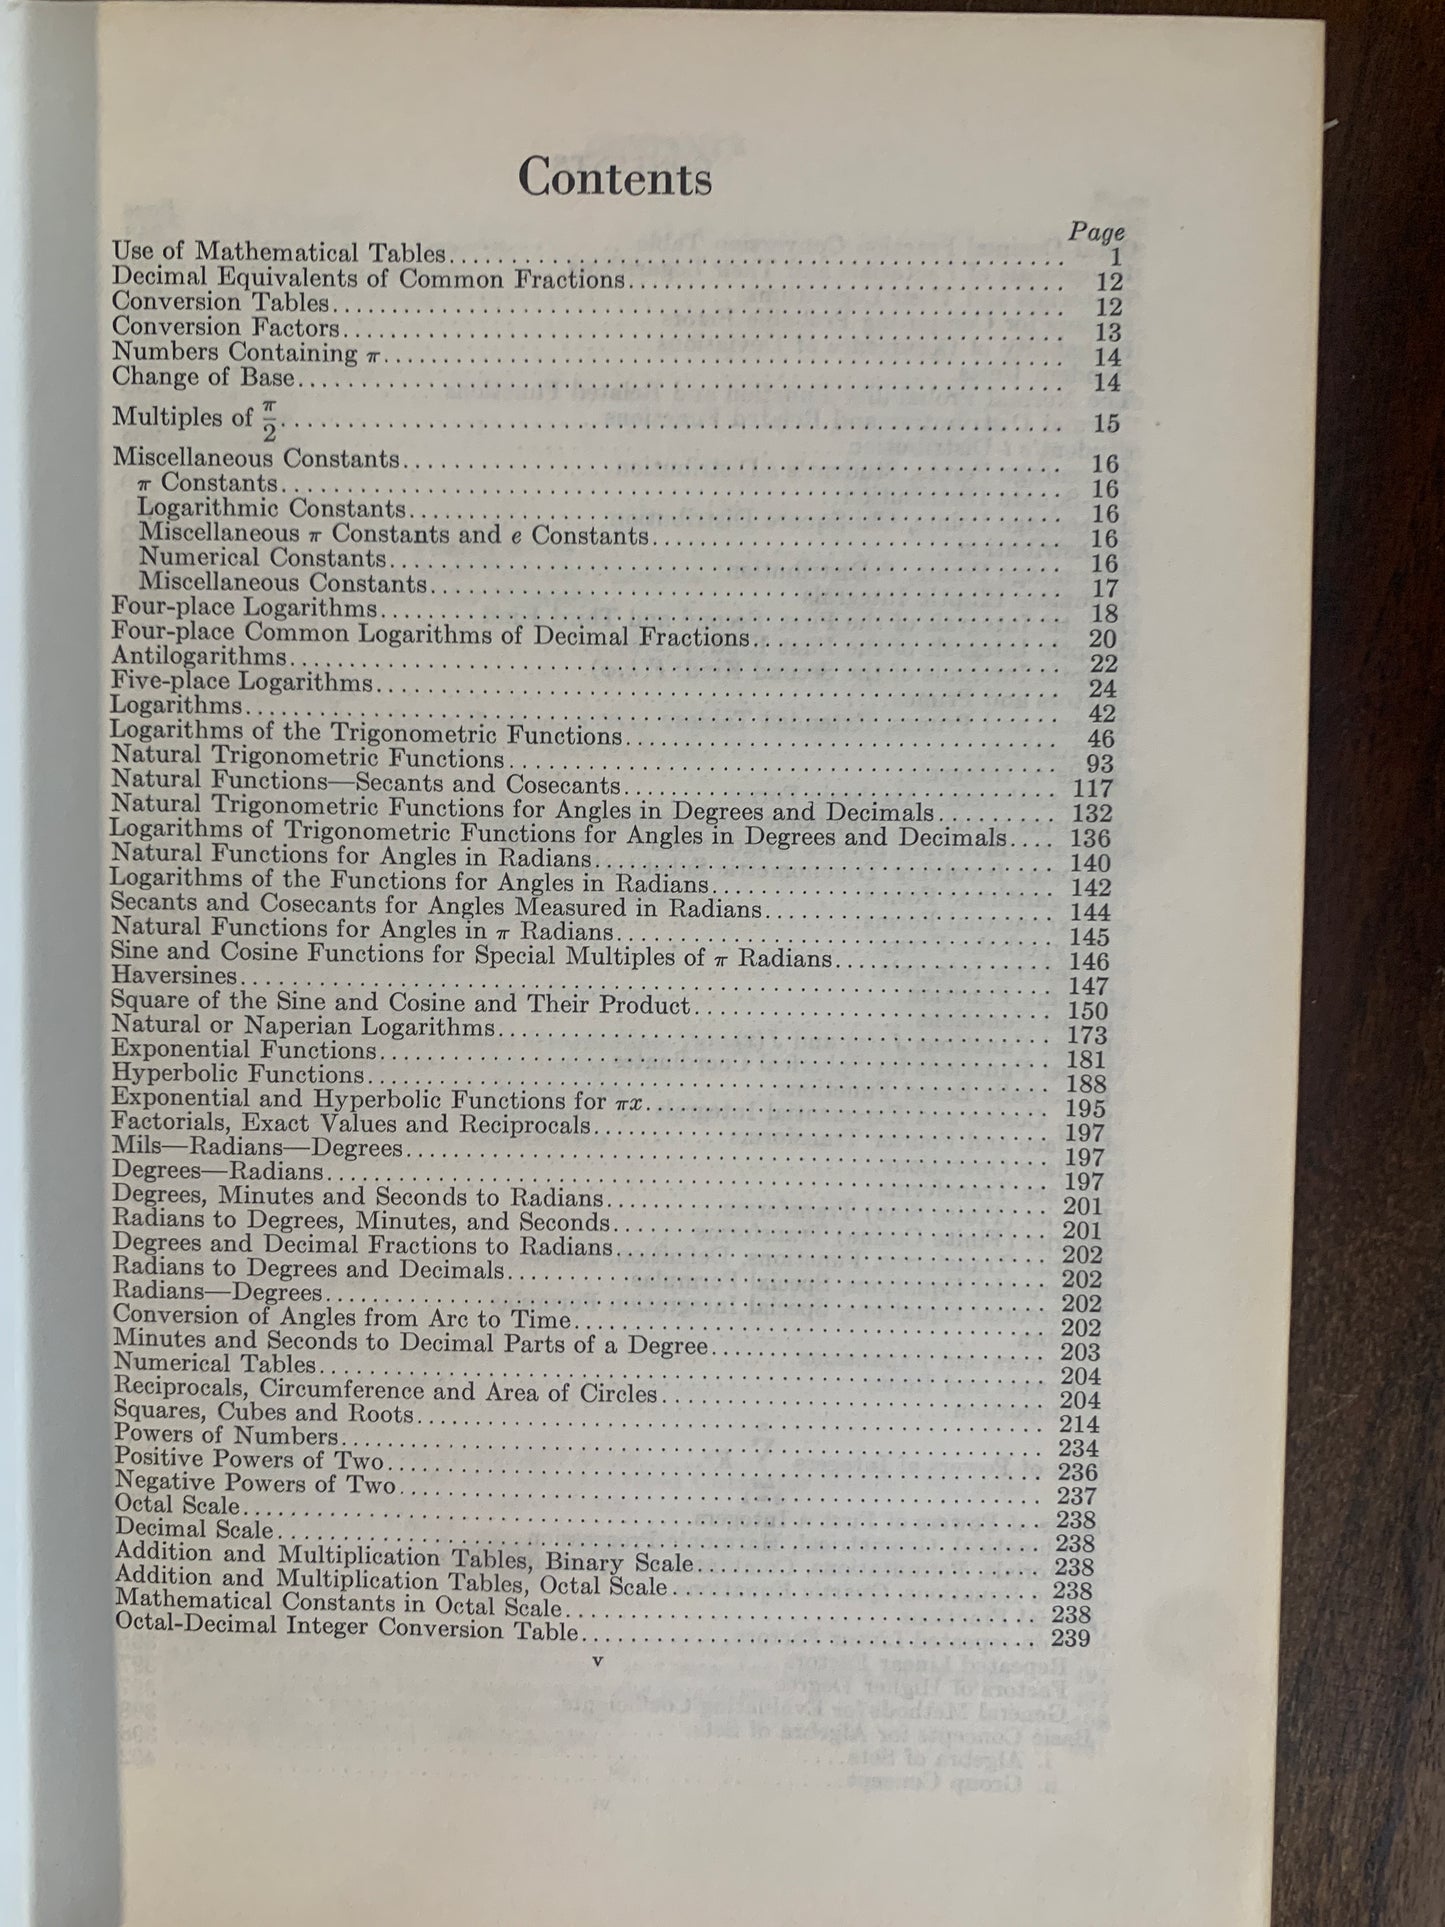 CRC Standard Mathematical Tables: Student Edition 14th Edition 1965